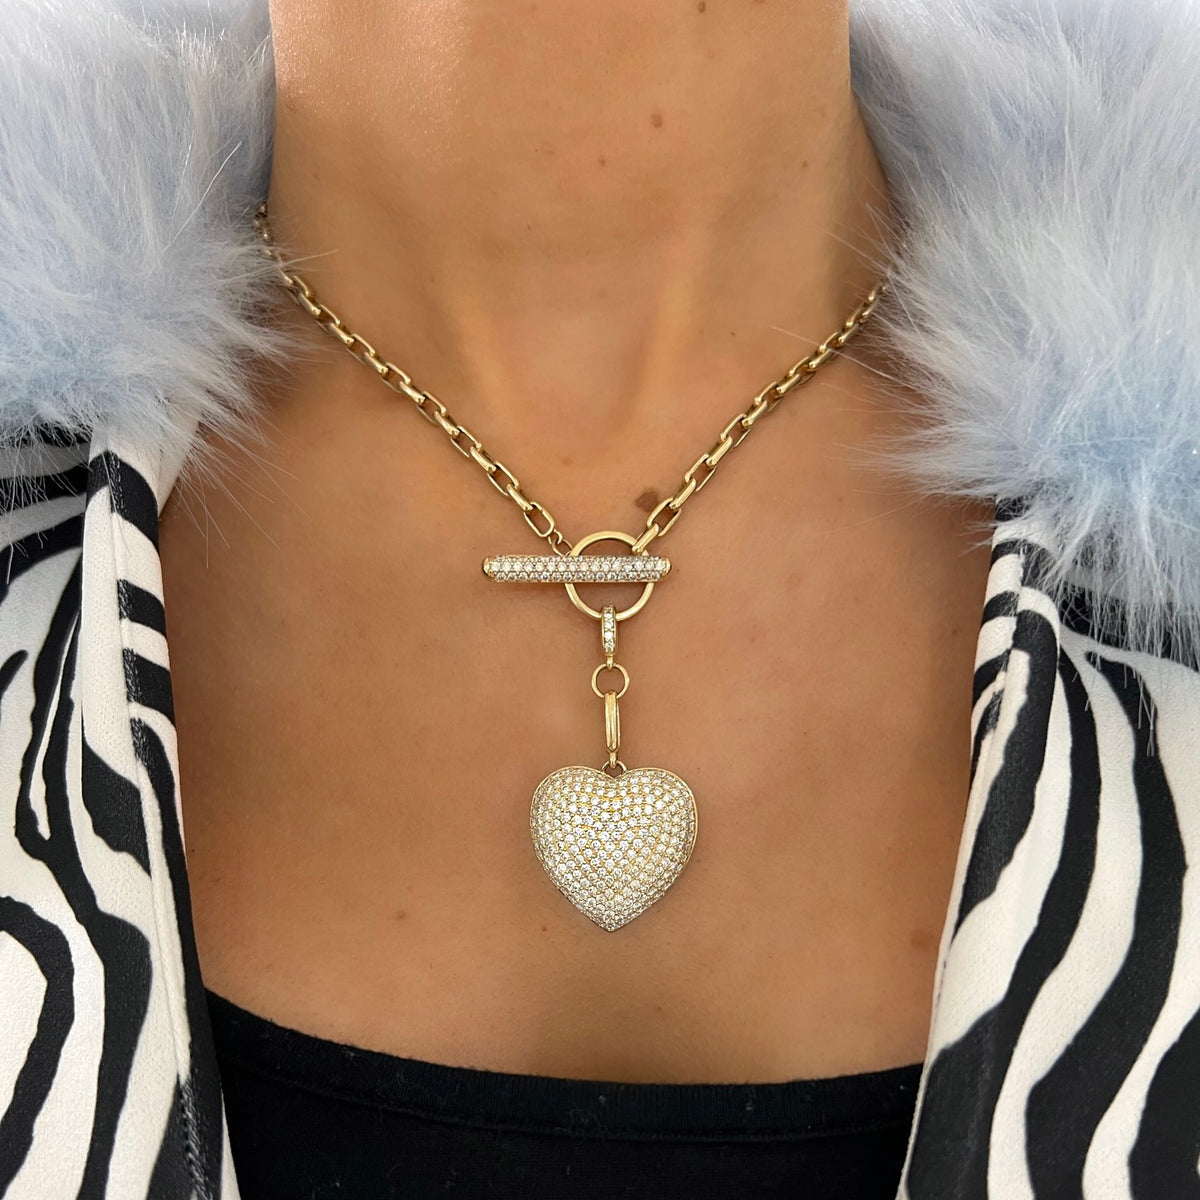 Hilton Diamond Toggle Necklace with removable Pave Heart charm and French Cable Chain